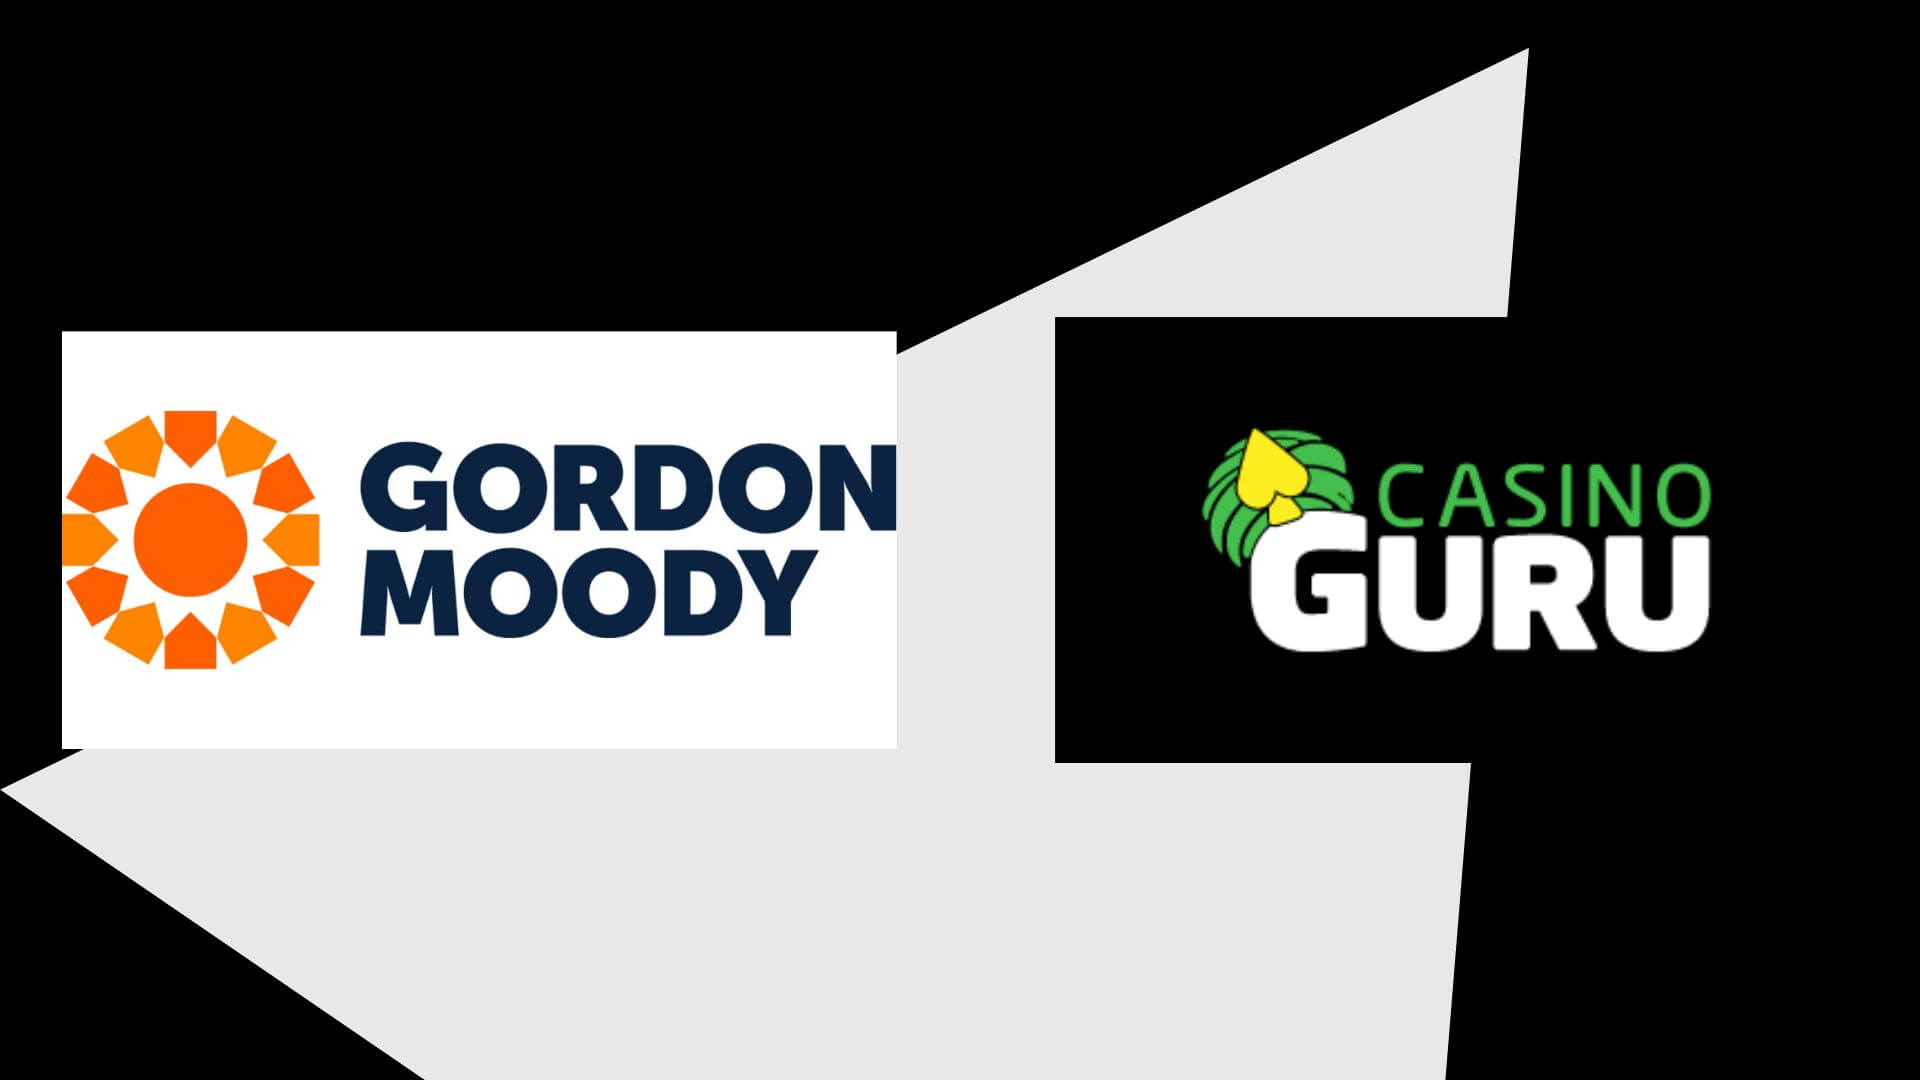 Casino Guru Teams Up With Gordon Moody For a Safer Gambling Course